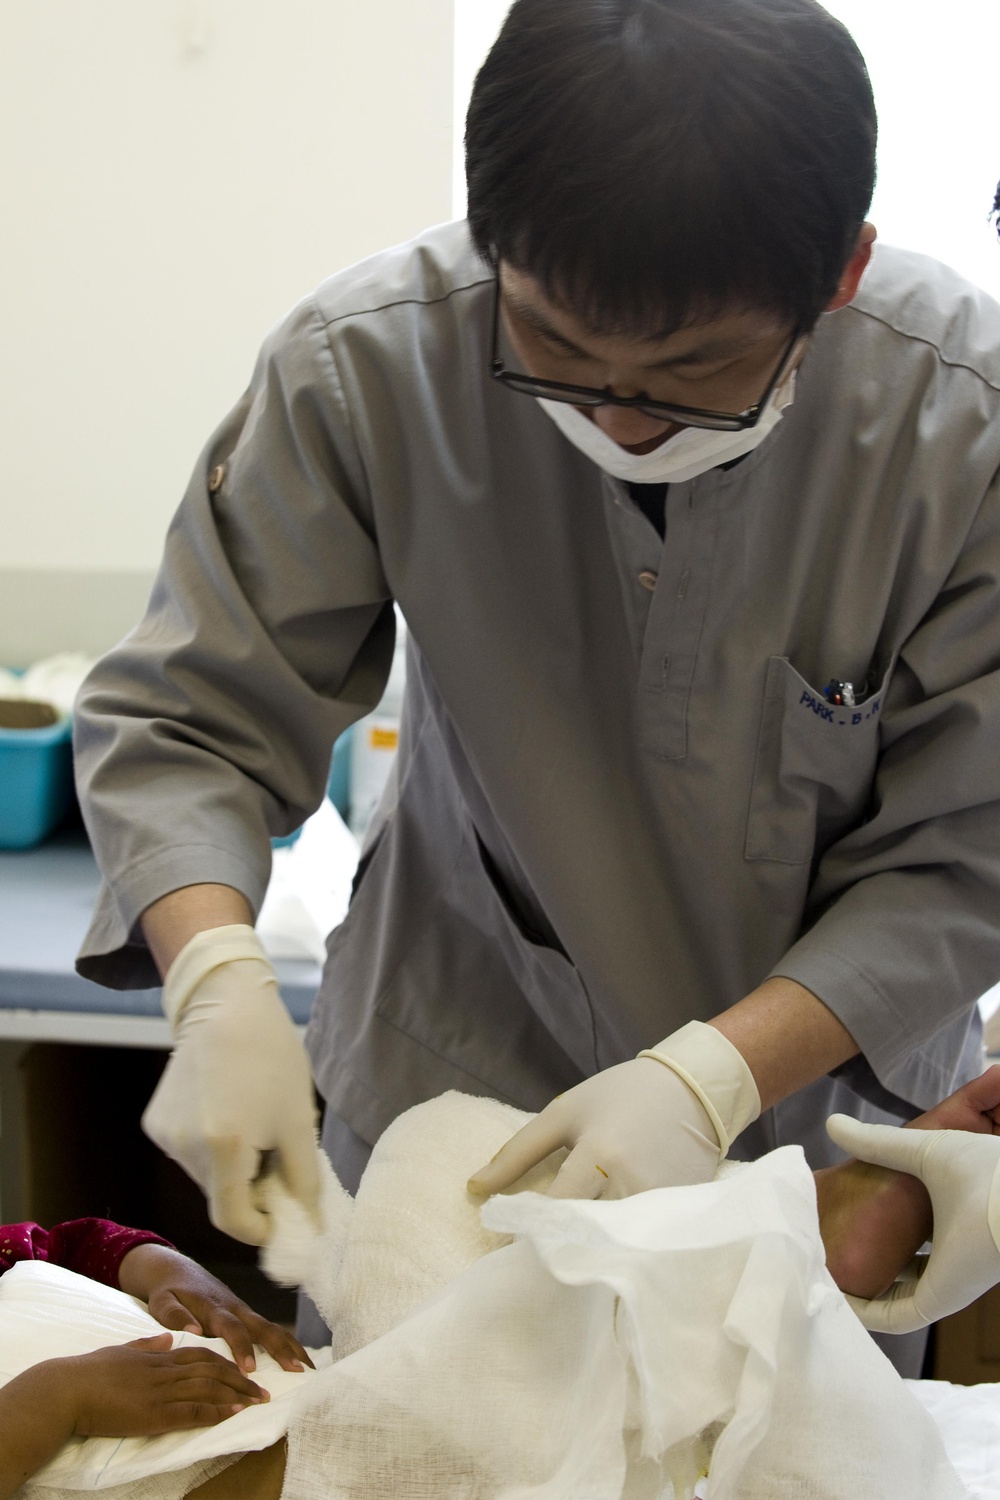 Afghans and Koreans make a difference at Bagram hospital